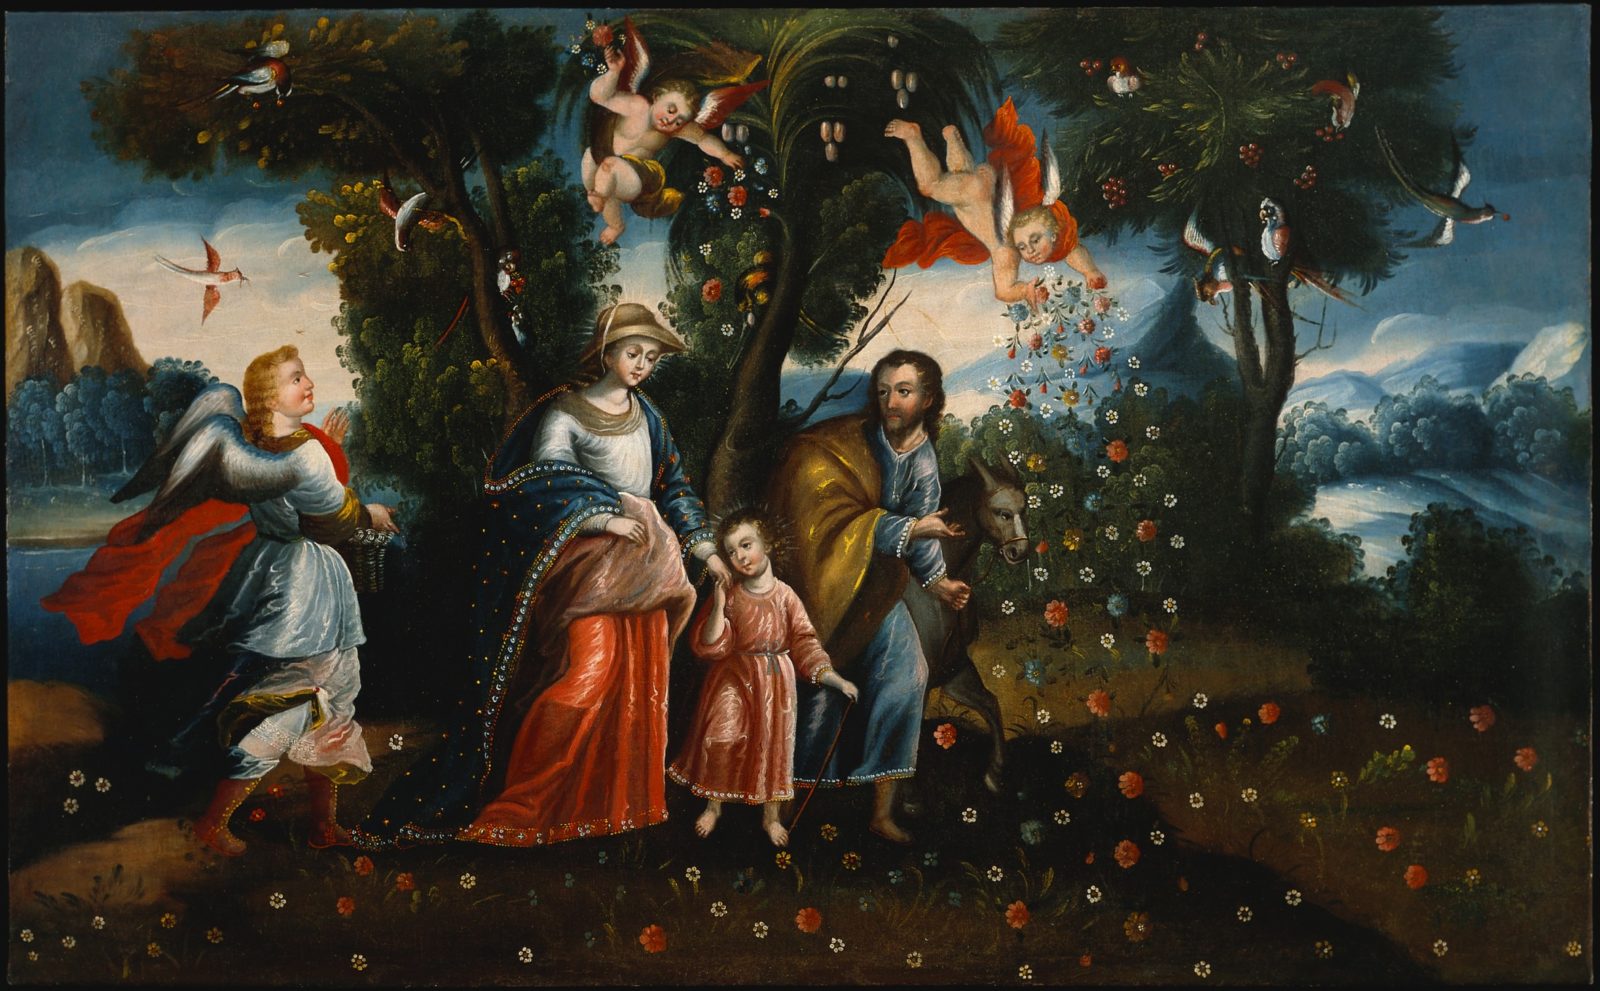 A painting depicting the Virgin Mary, an seven-year-old Christ, and Saint Joseph in an exotic landscape followed by an angel and putti overhead.